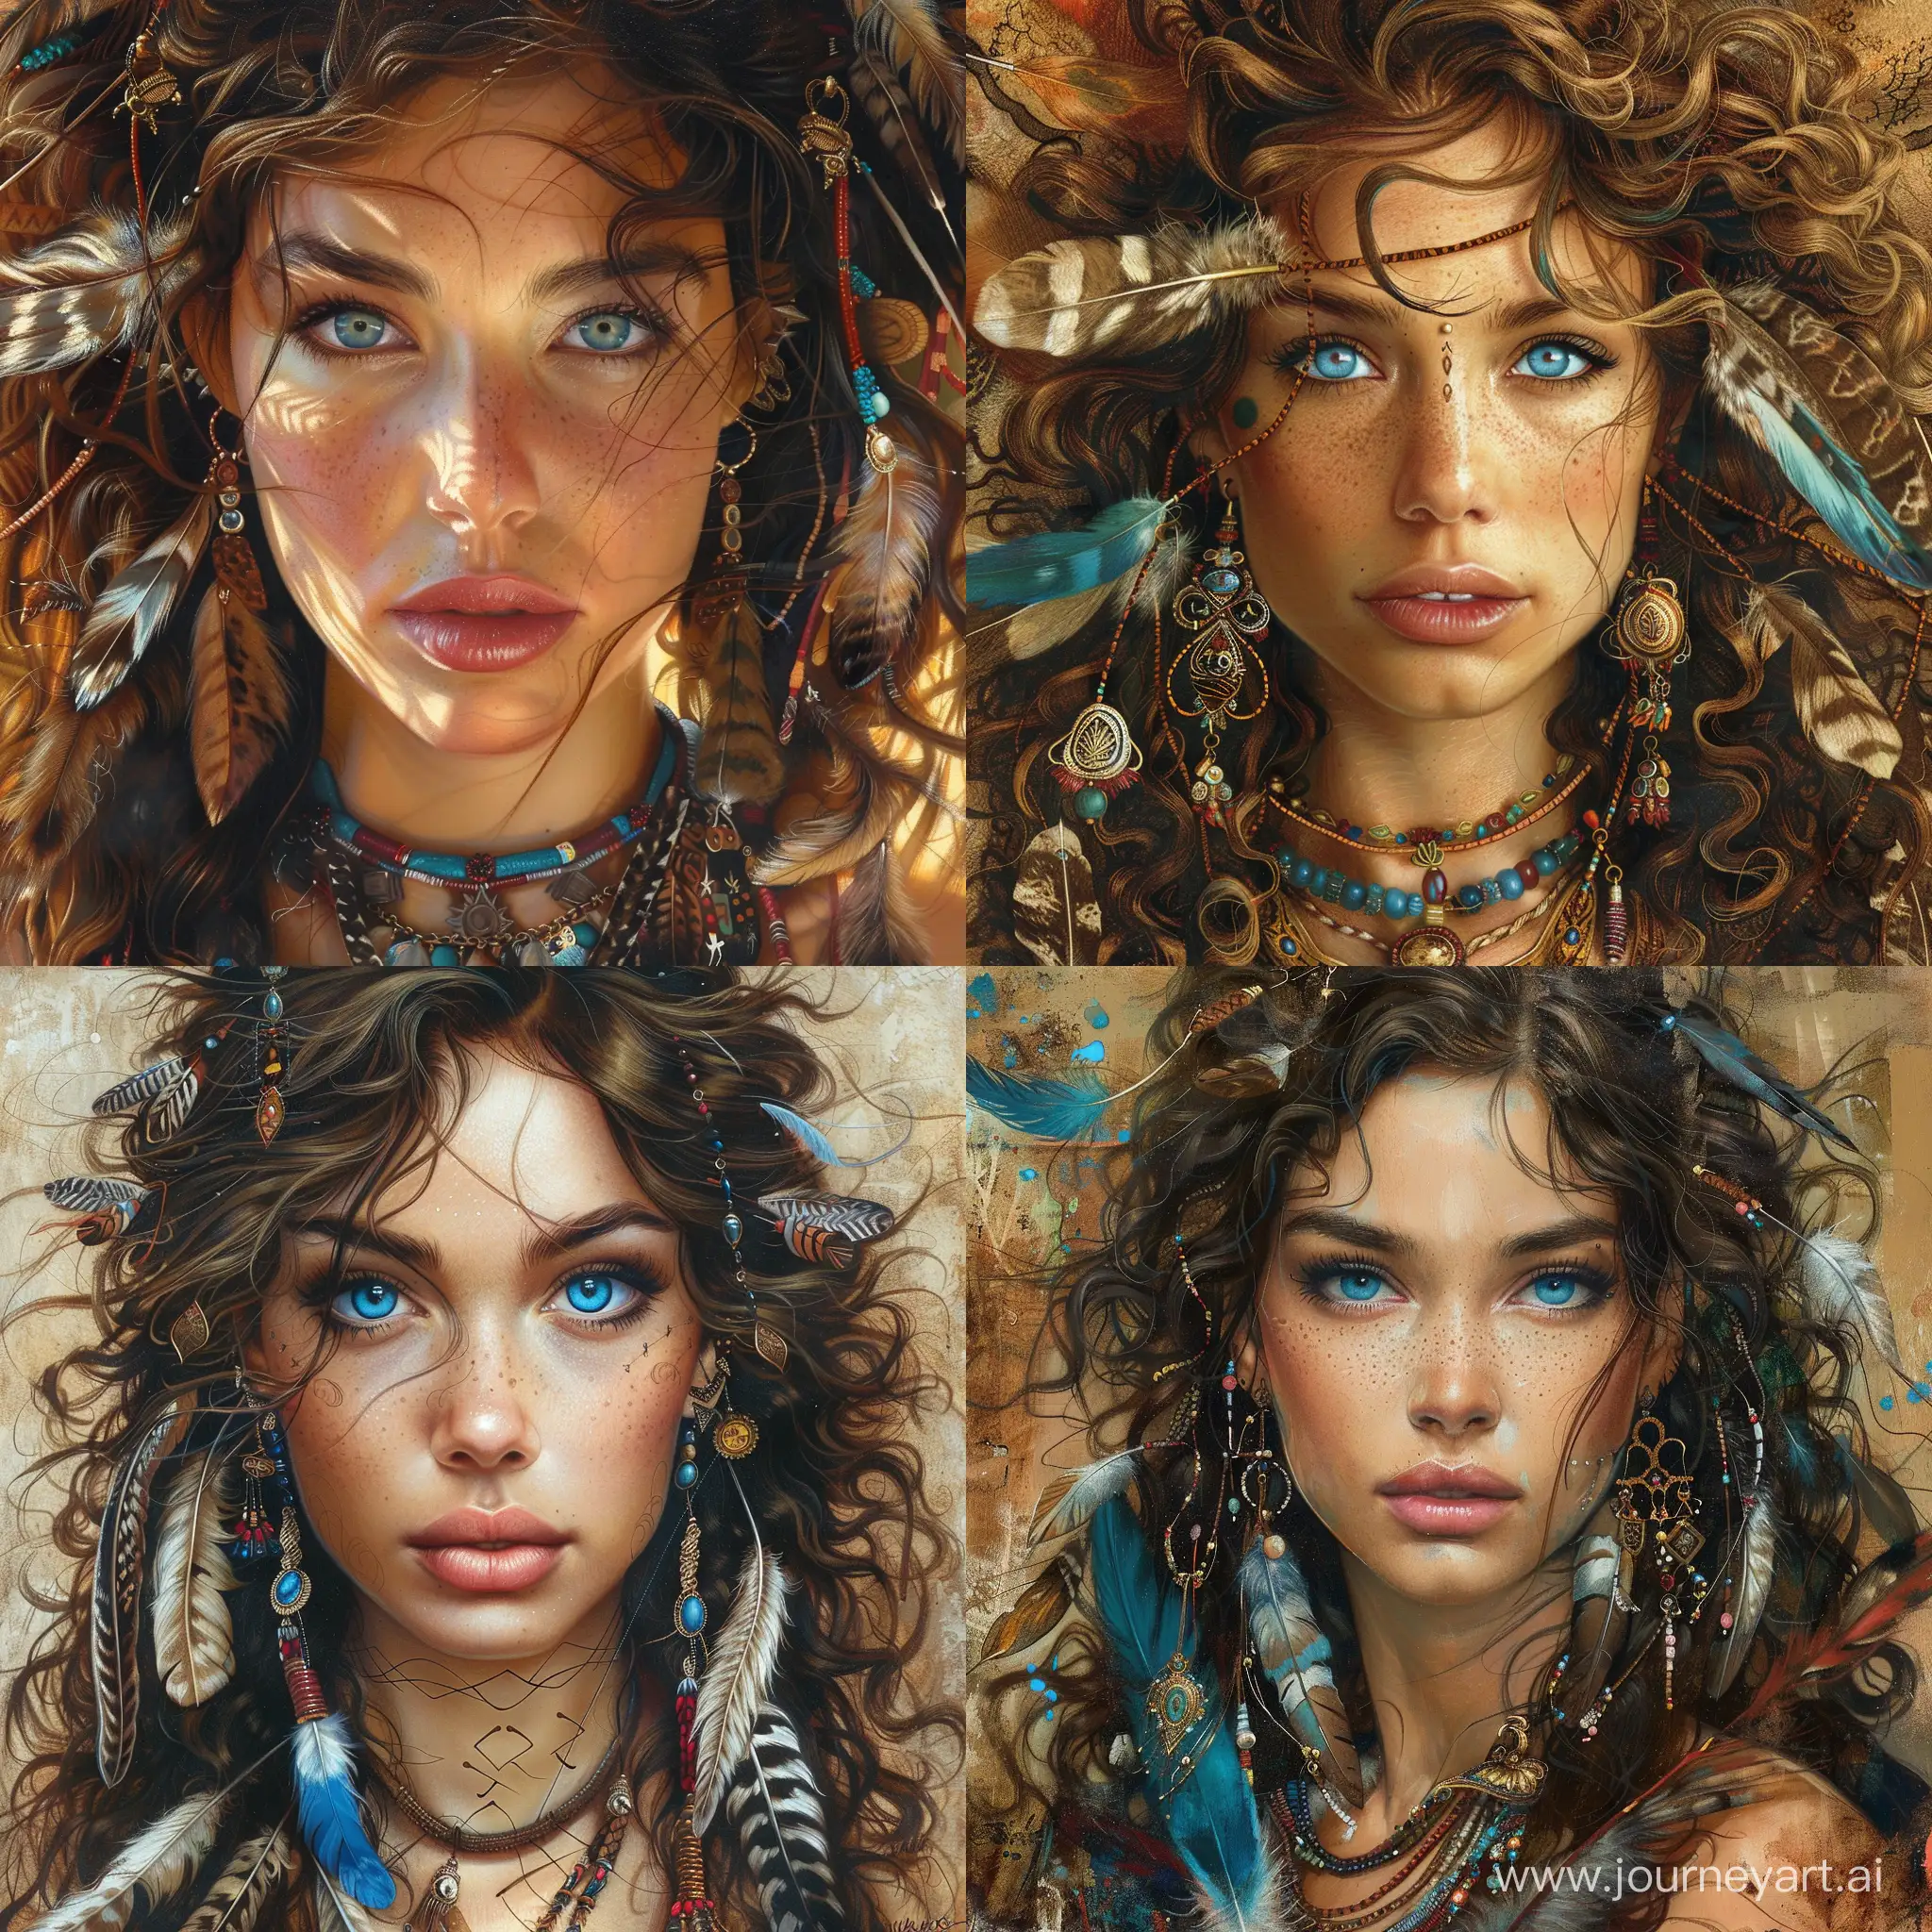 Indian-Woman-with-Blue-Eyes-and-Curly-Brunette-Hair-Adorned-with-Feathers-and-Trinkets